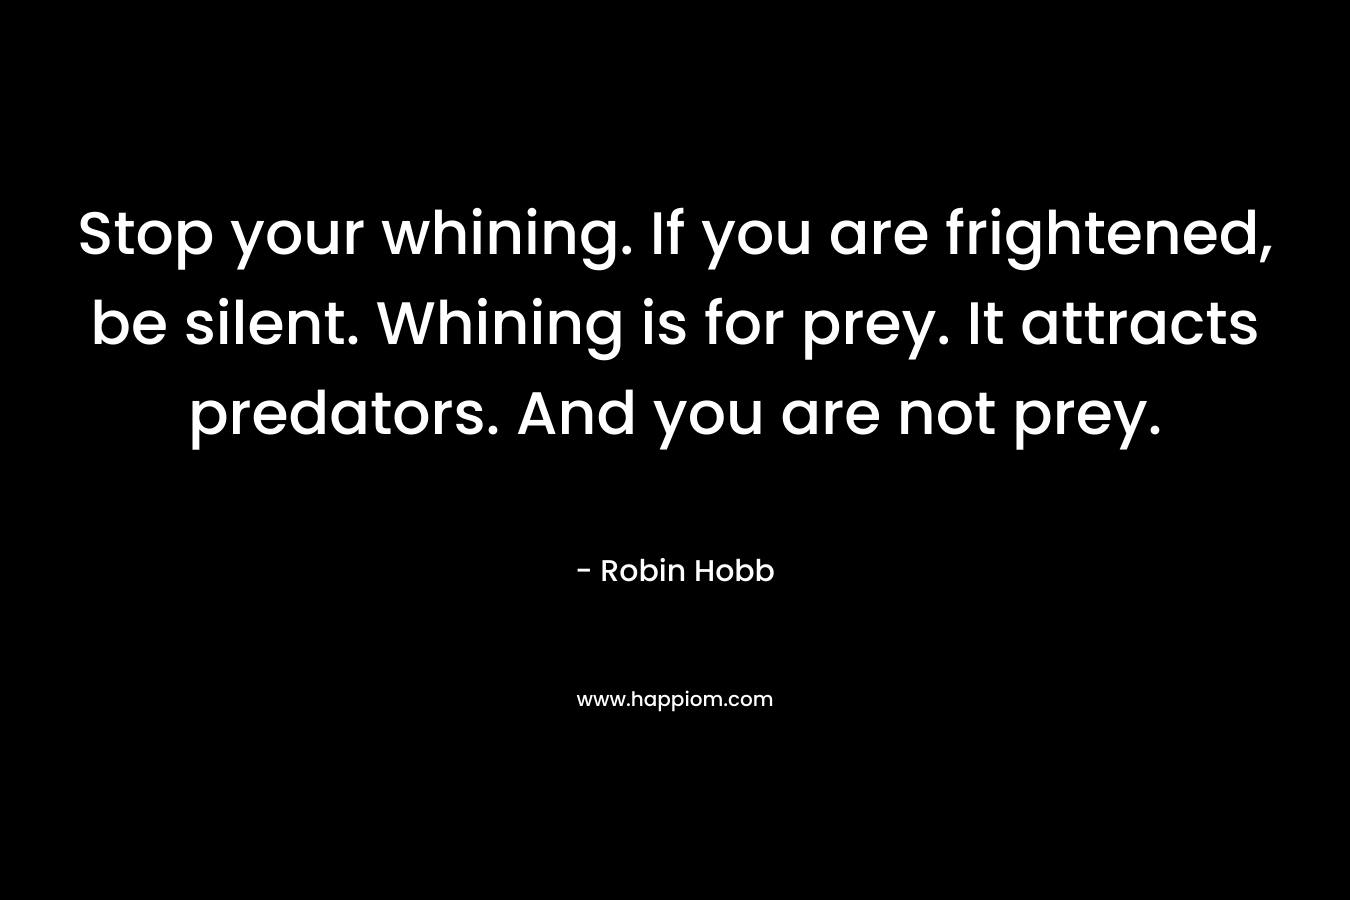 Stop your whining. If you are frightened, be silent. Whining is for prey. It attracts predators. And you are not prey.